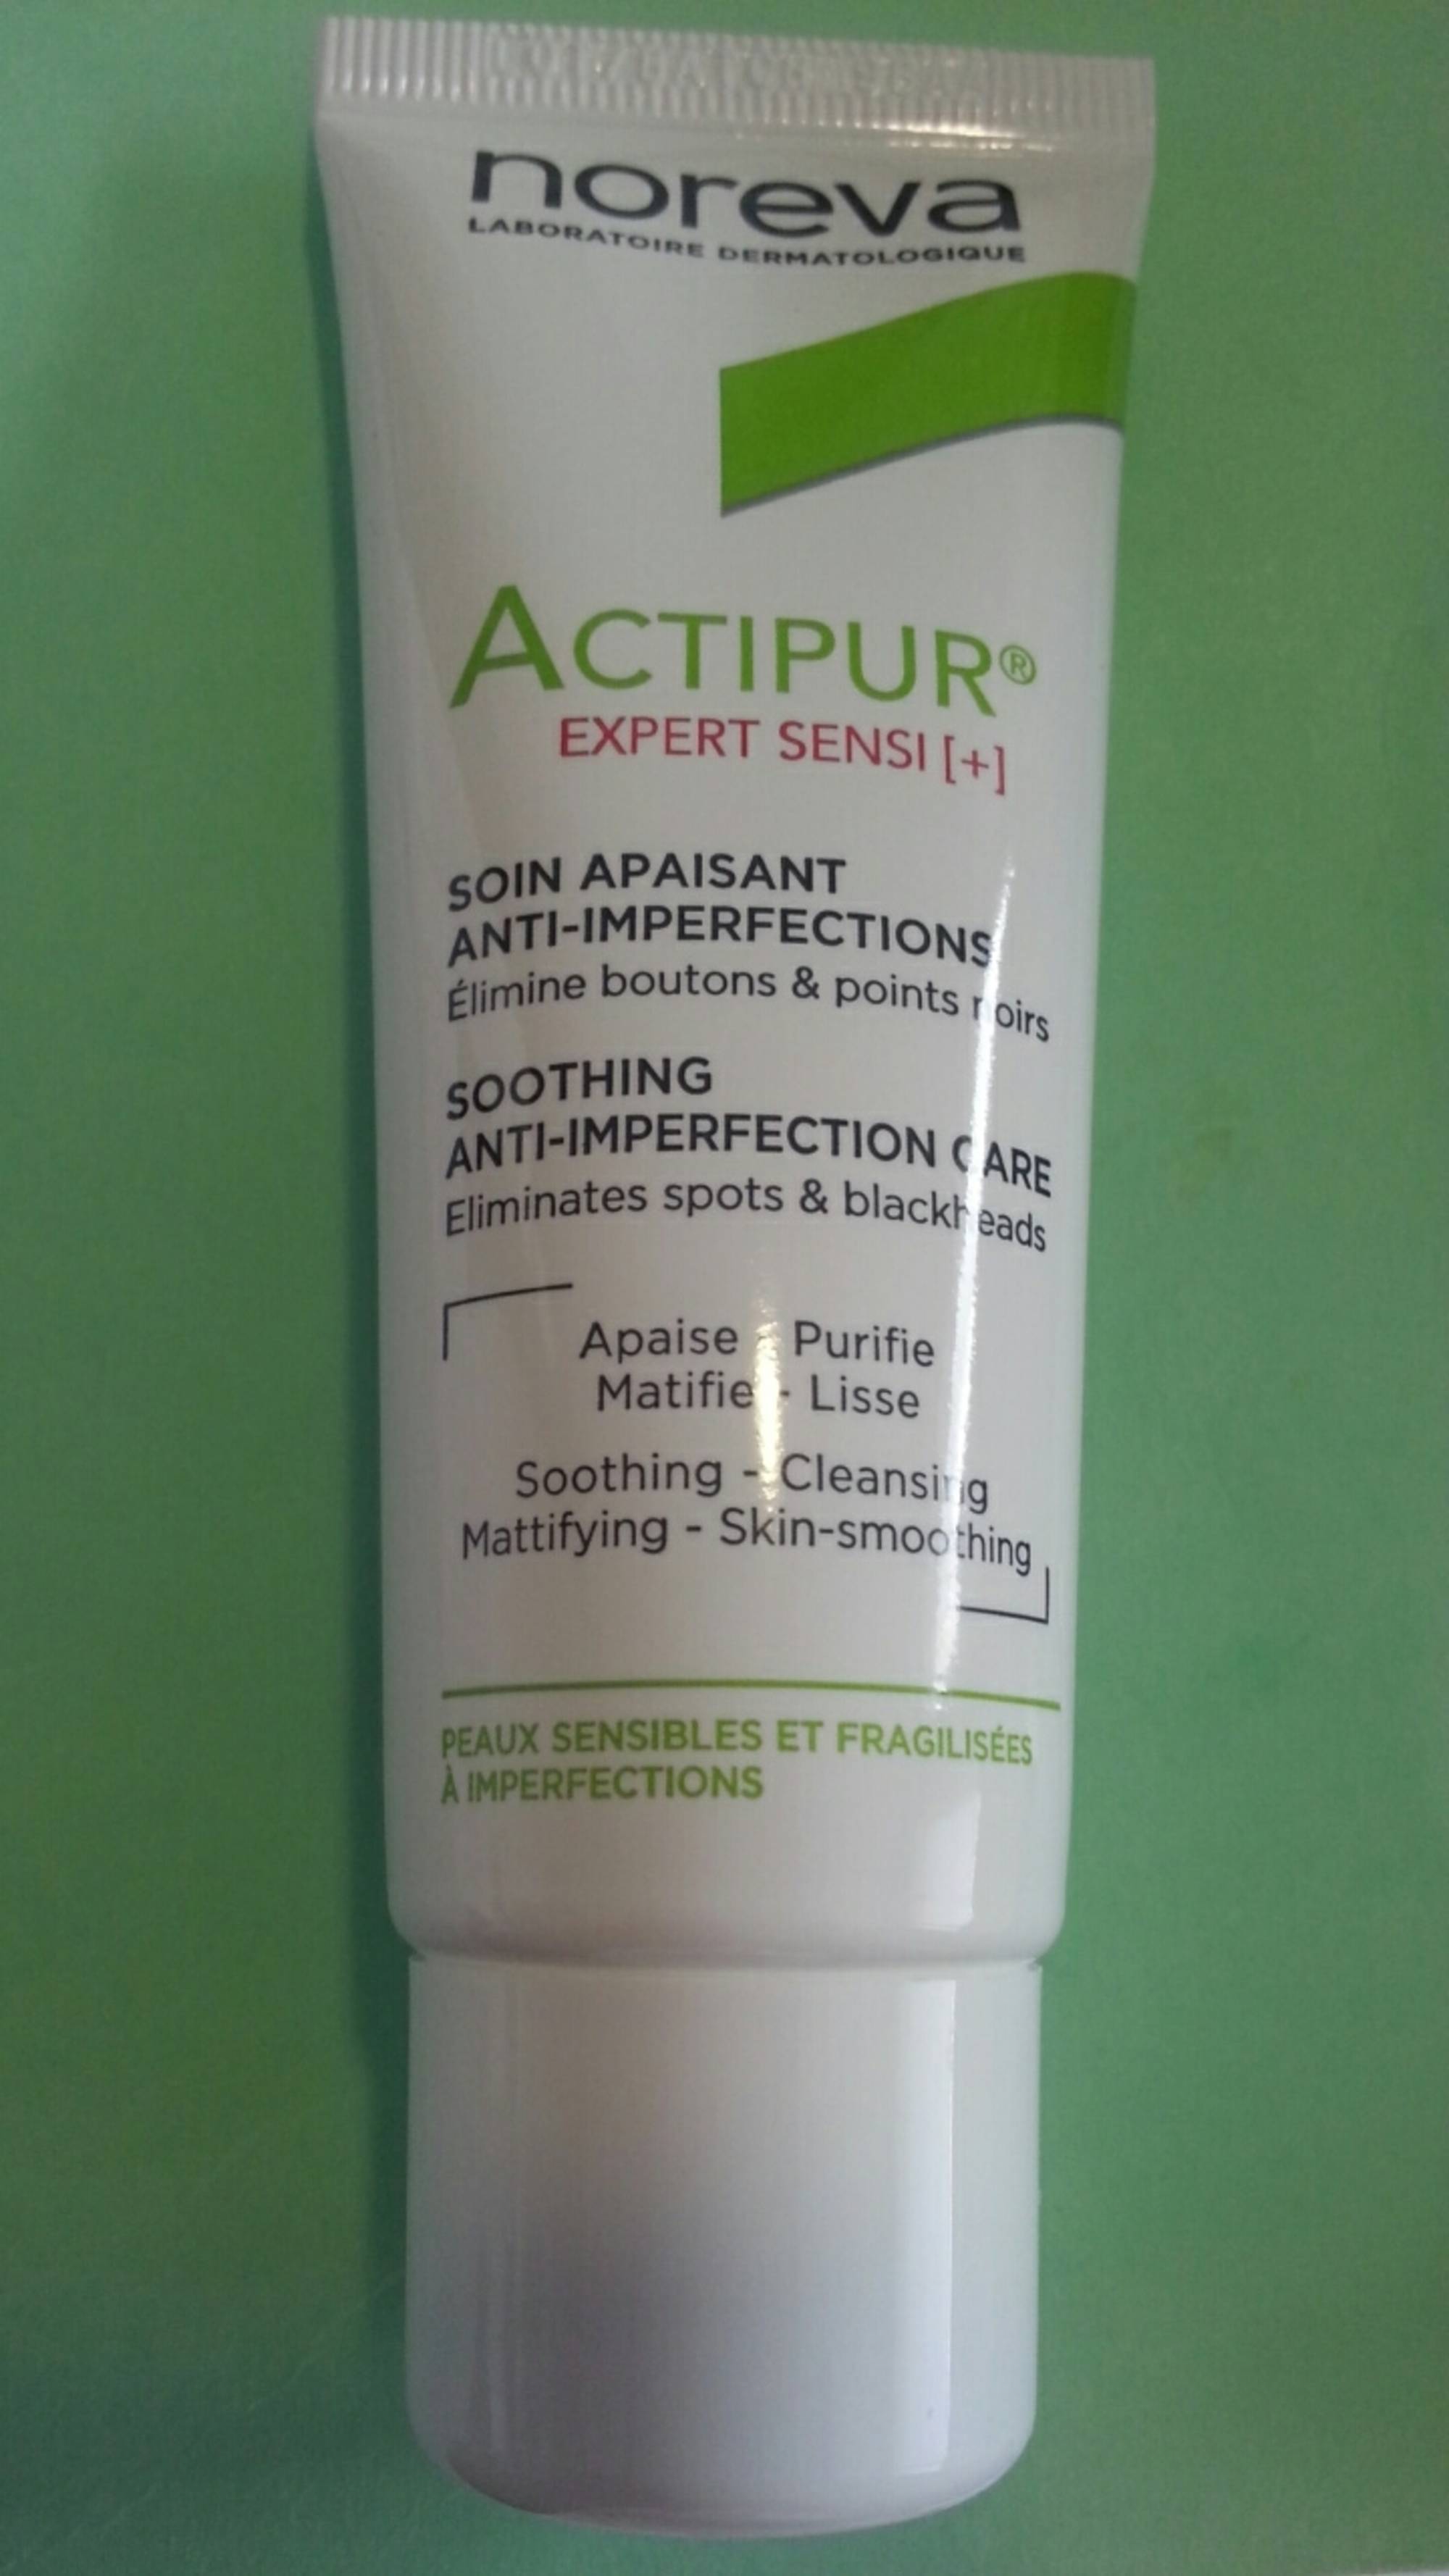 NOREVA - Actipur - Soin apaisant anti-imperfections